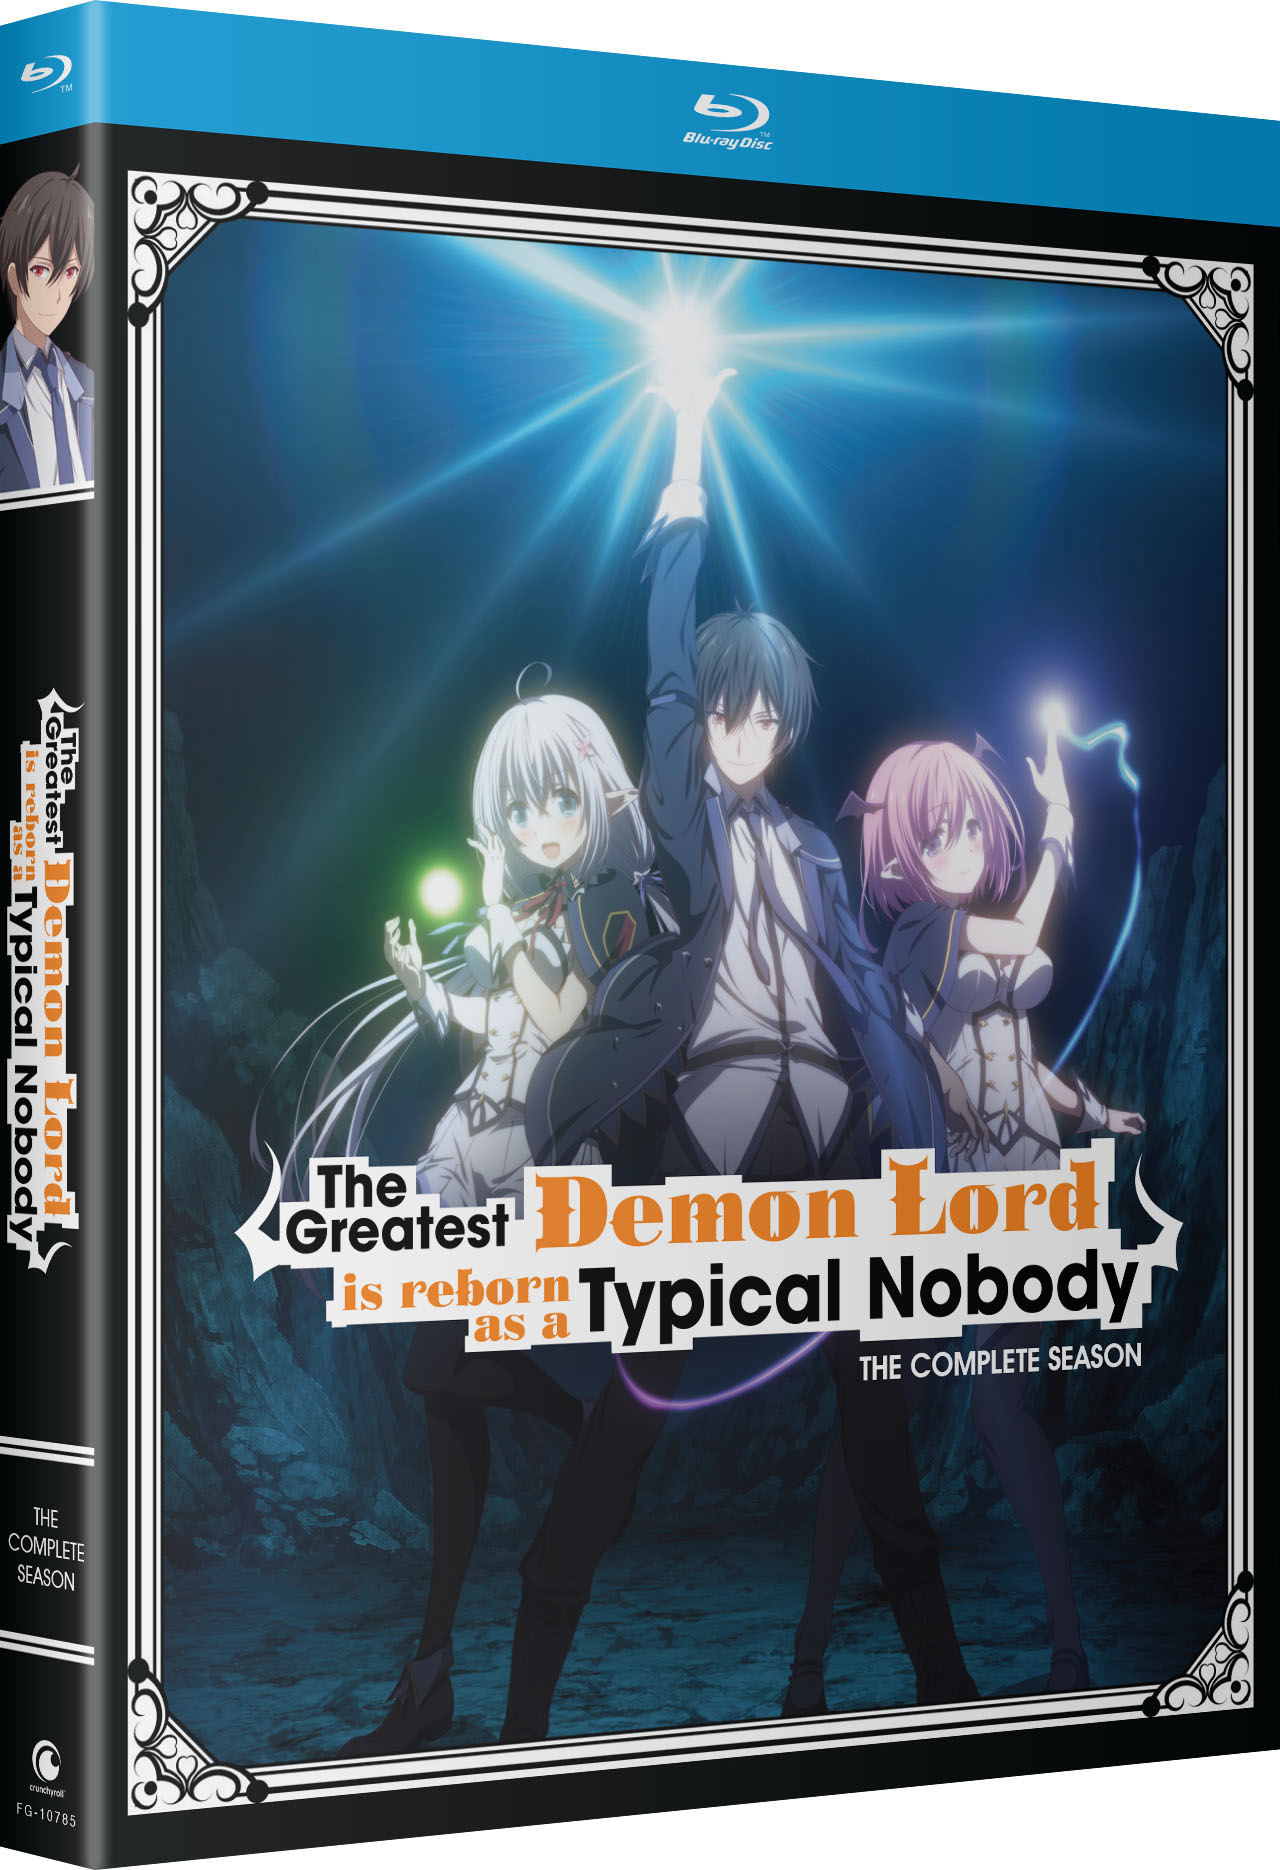 

The Greatest Demon Lord is Reborn as a Typical Nobody: The Complete Season [Blu-ray]